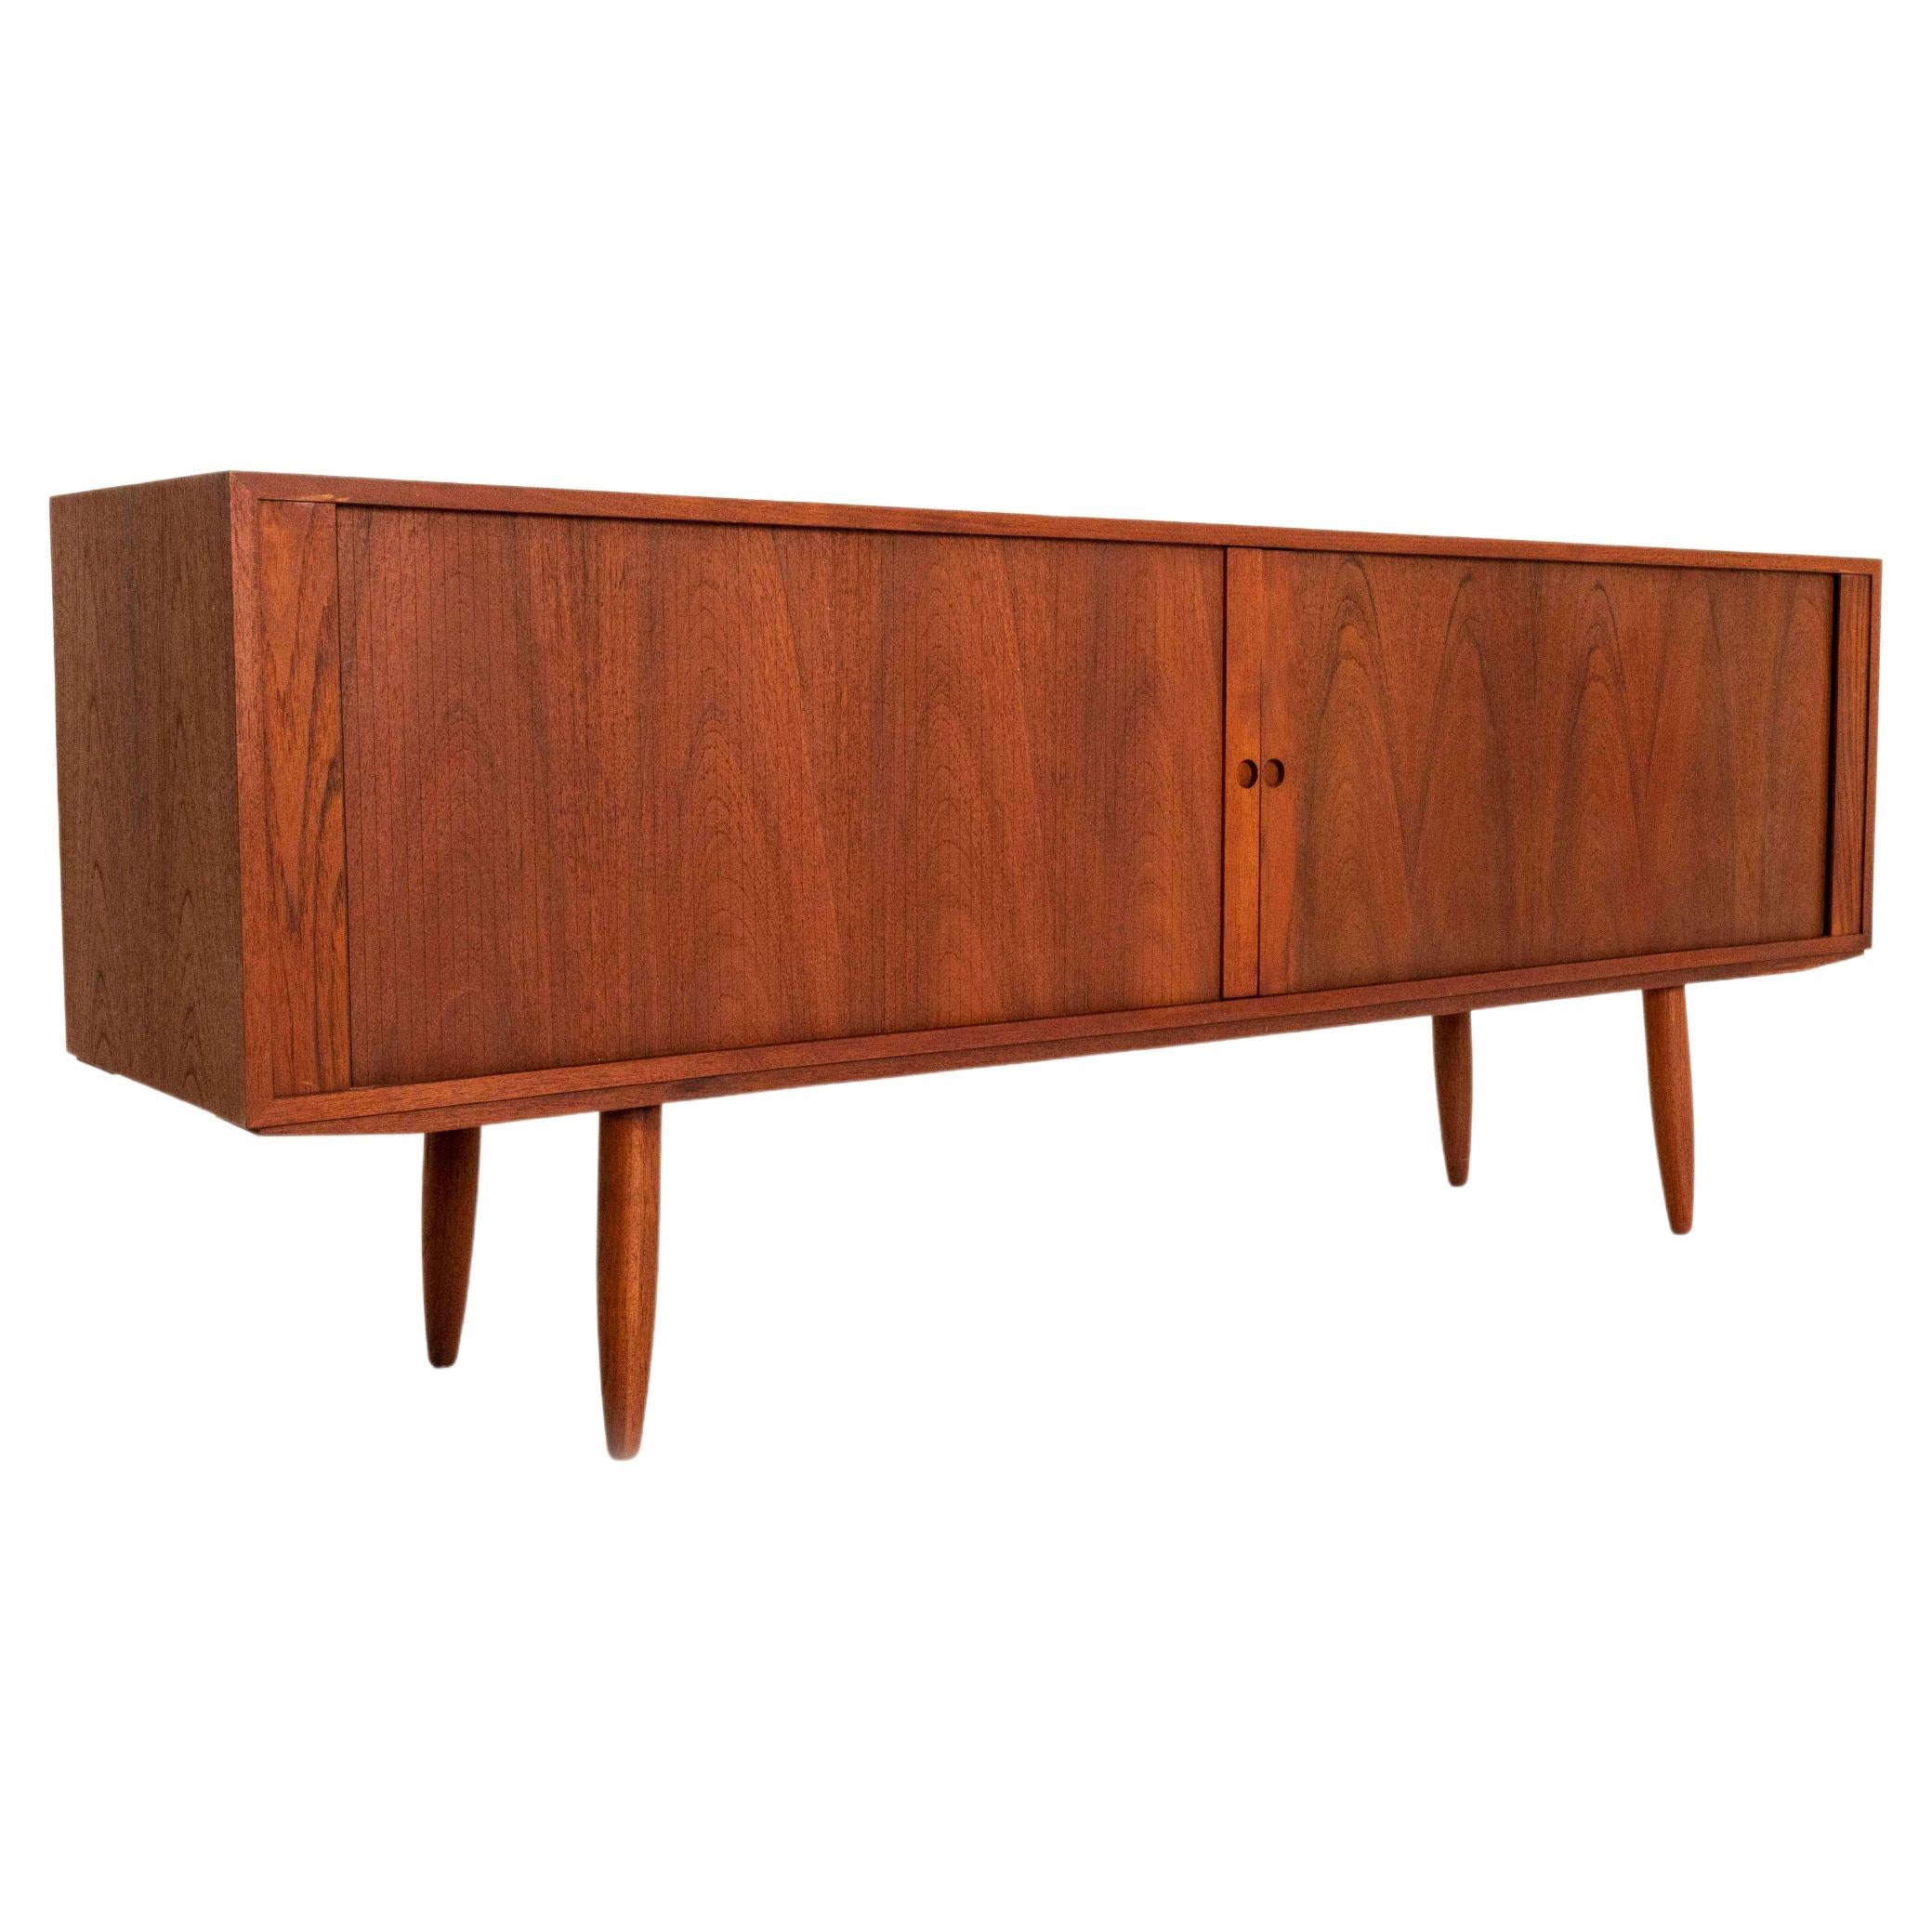 Impressive Danish sideboard in teak by Bruno Hansen. This Sideboard has tambour doors with four colored drawers. Although, fully in the style of the Danish sideboards in the 1960s; this sideboard is probably manufactured in the 2000s. In very good